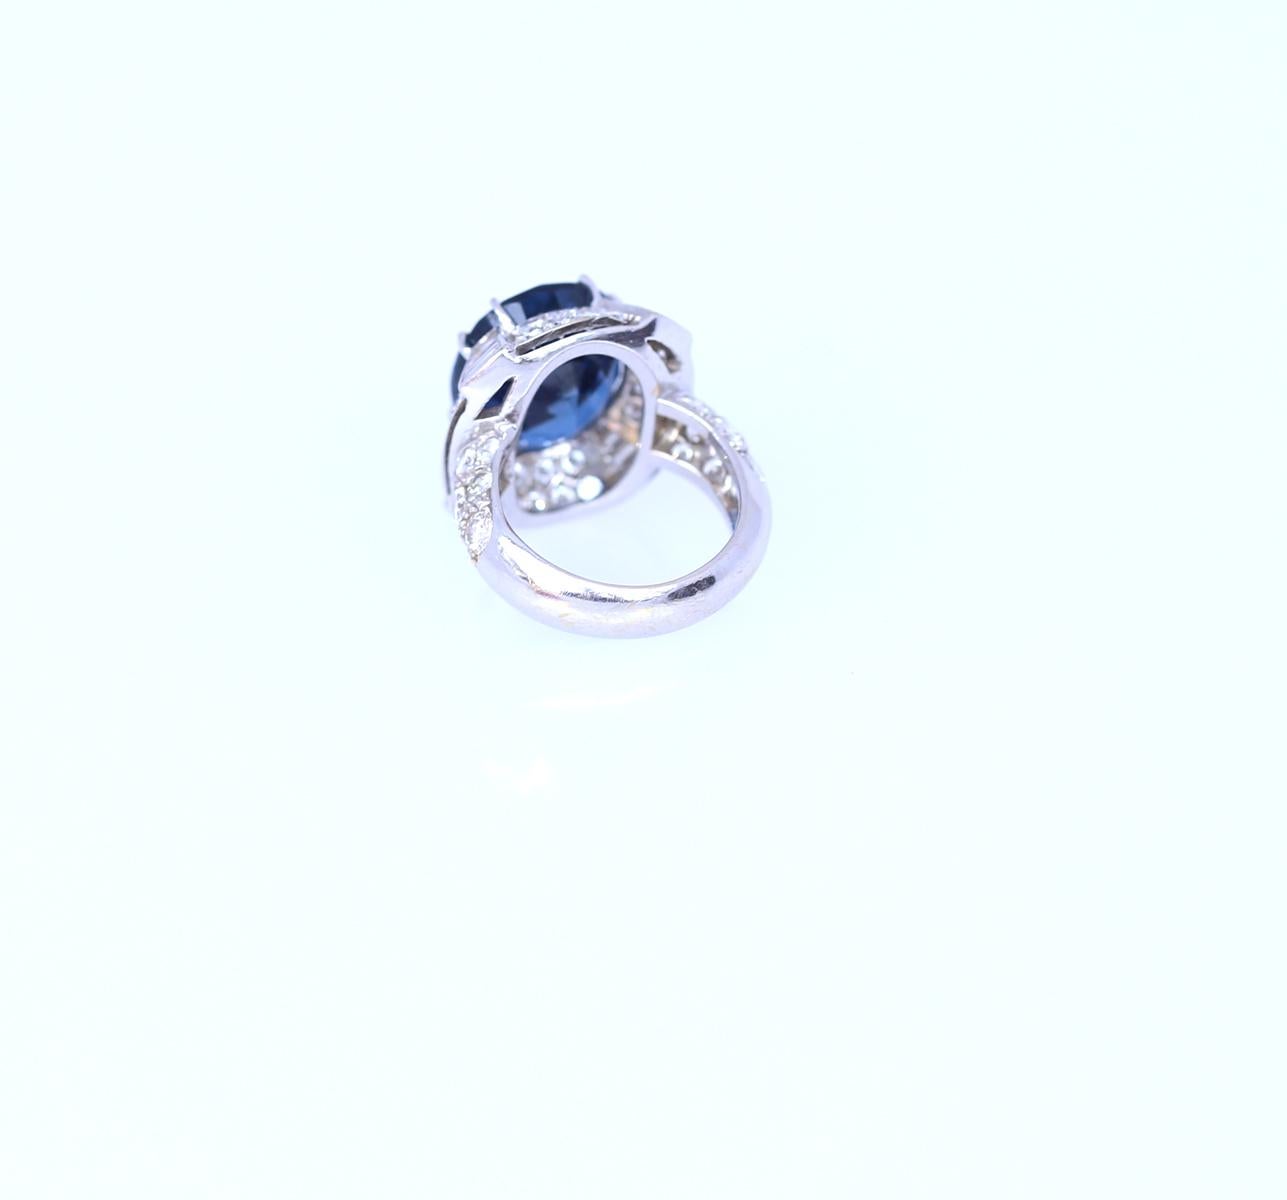 14.6 Ct Natural Sapphire Certified Diamond Ring 18K Gold, 1998 For Sale 6